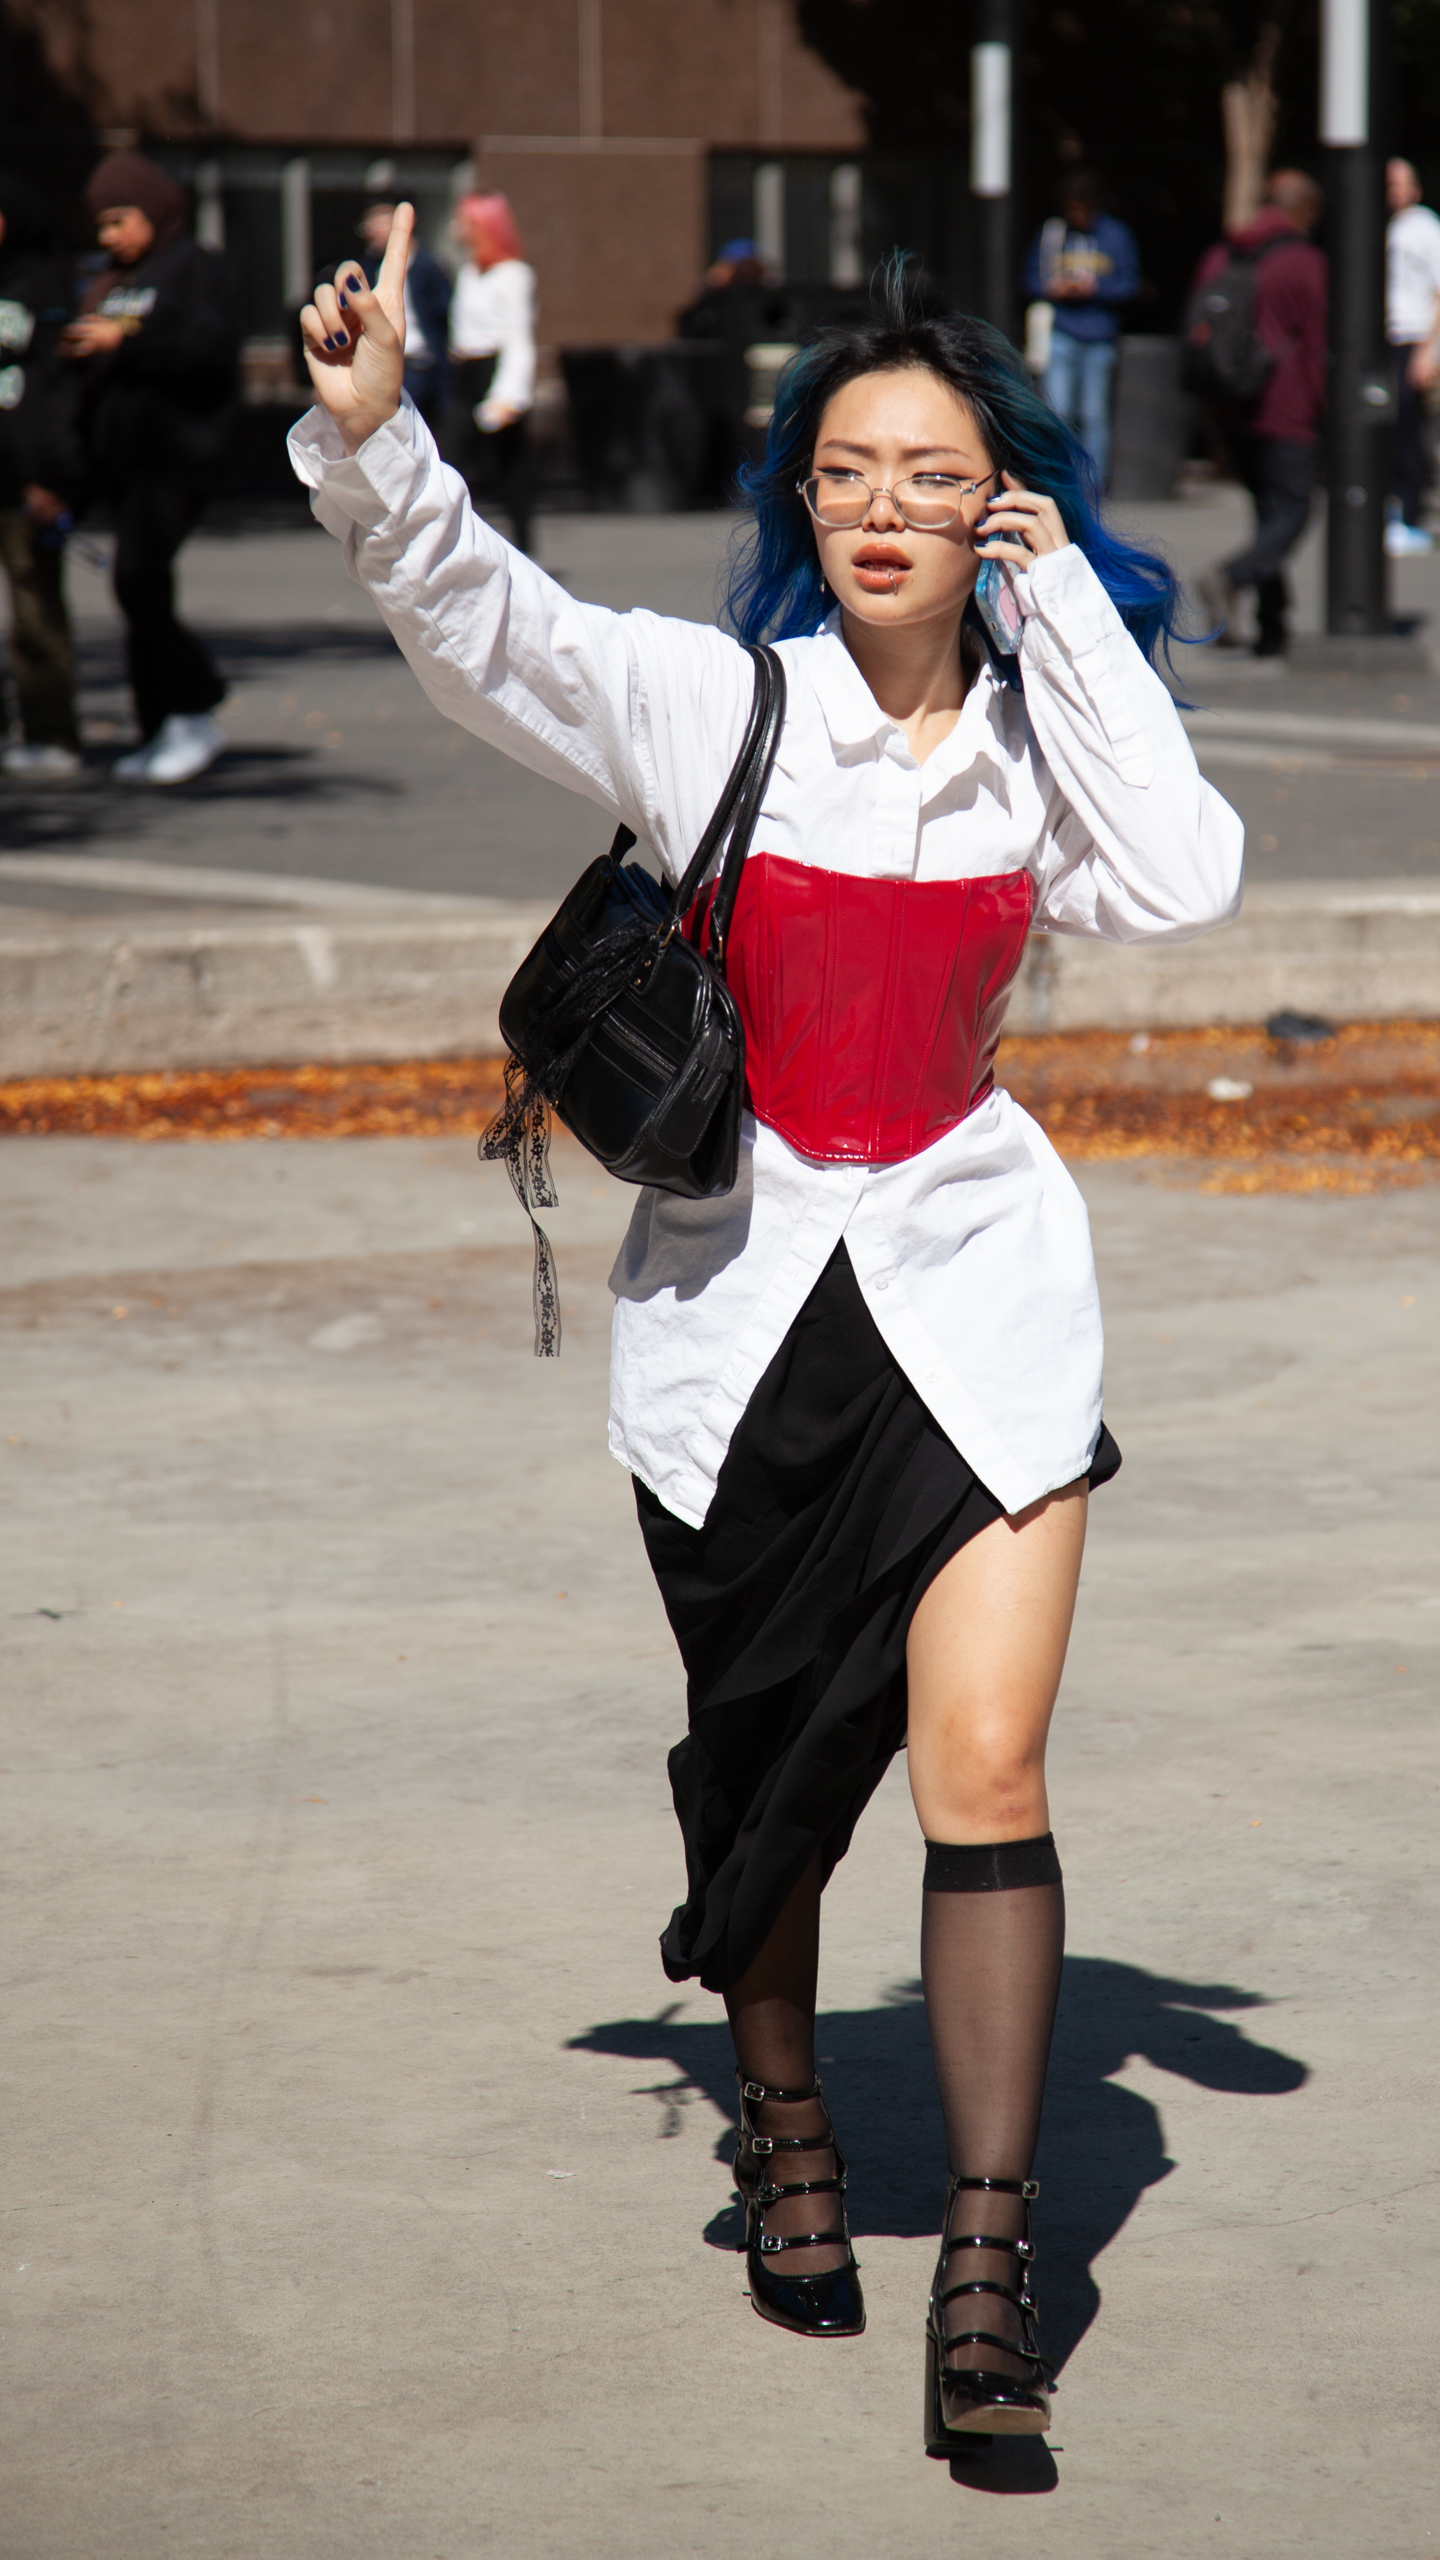 Model walks through campus wearing a bright red corset over button shirt and a sheer dress while pretending to hail a cab